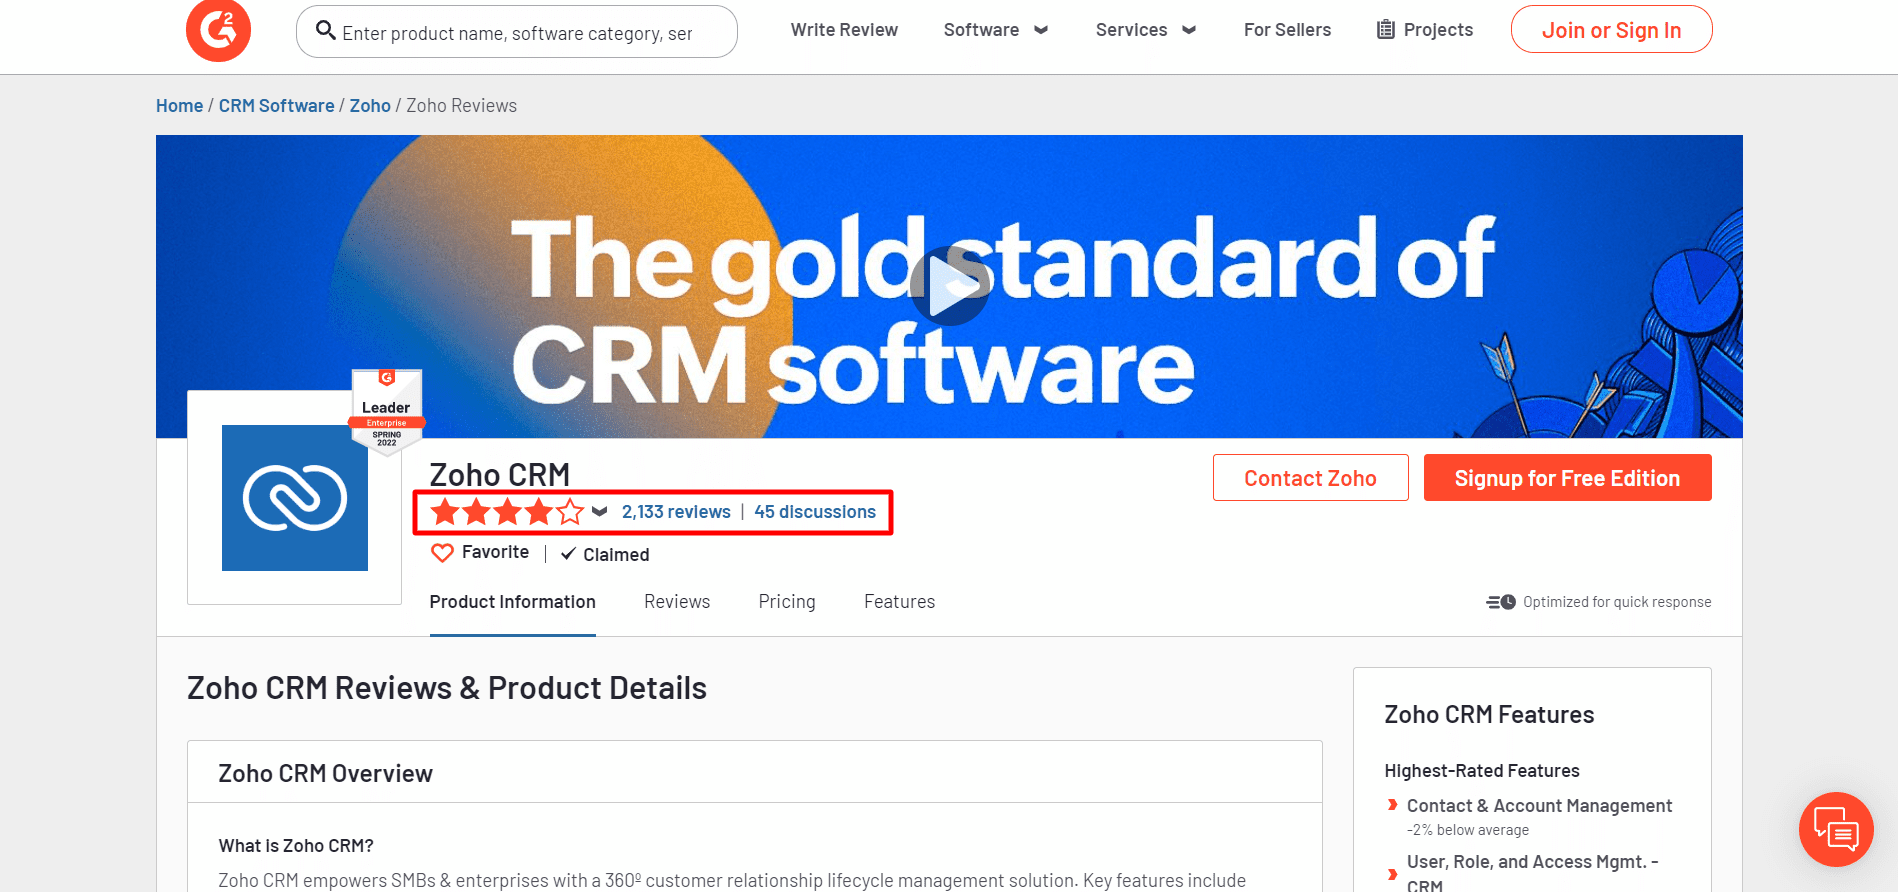 Zoho CRM Reviews ratings ease of use